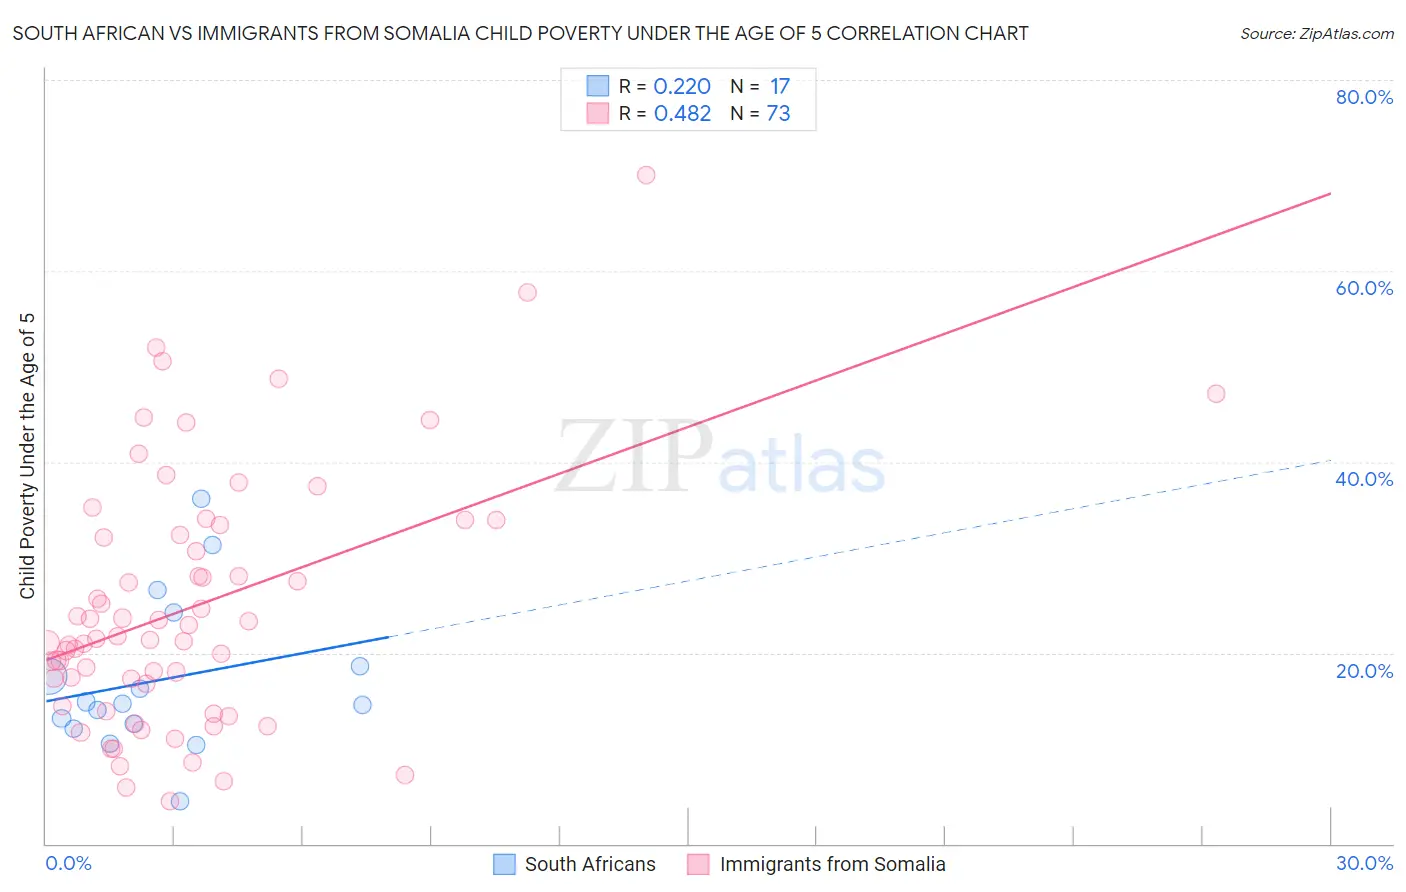 South African vs Immigrants from Somalia Child Poverty Under the Age of 5